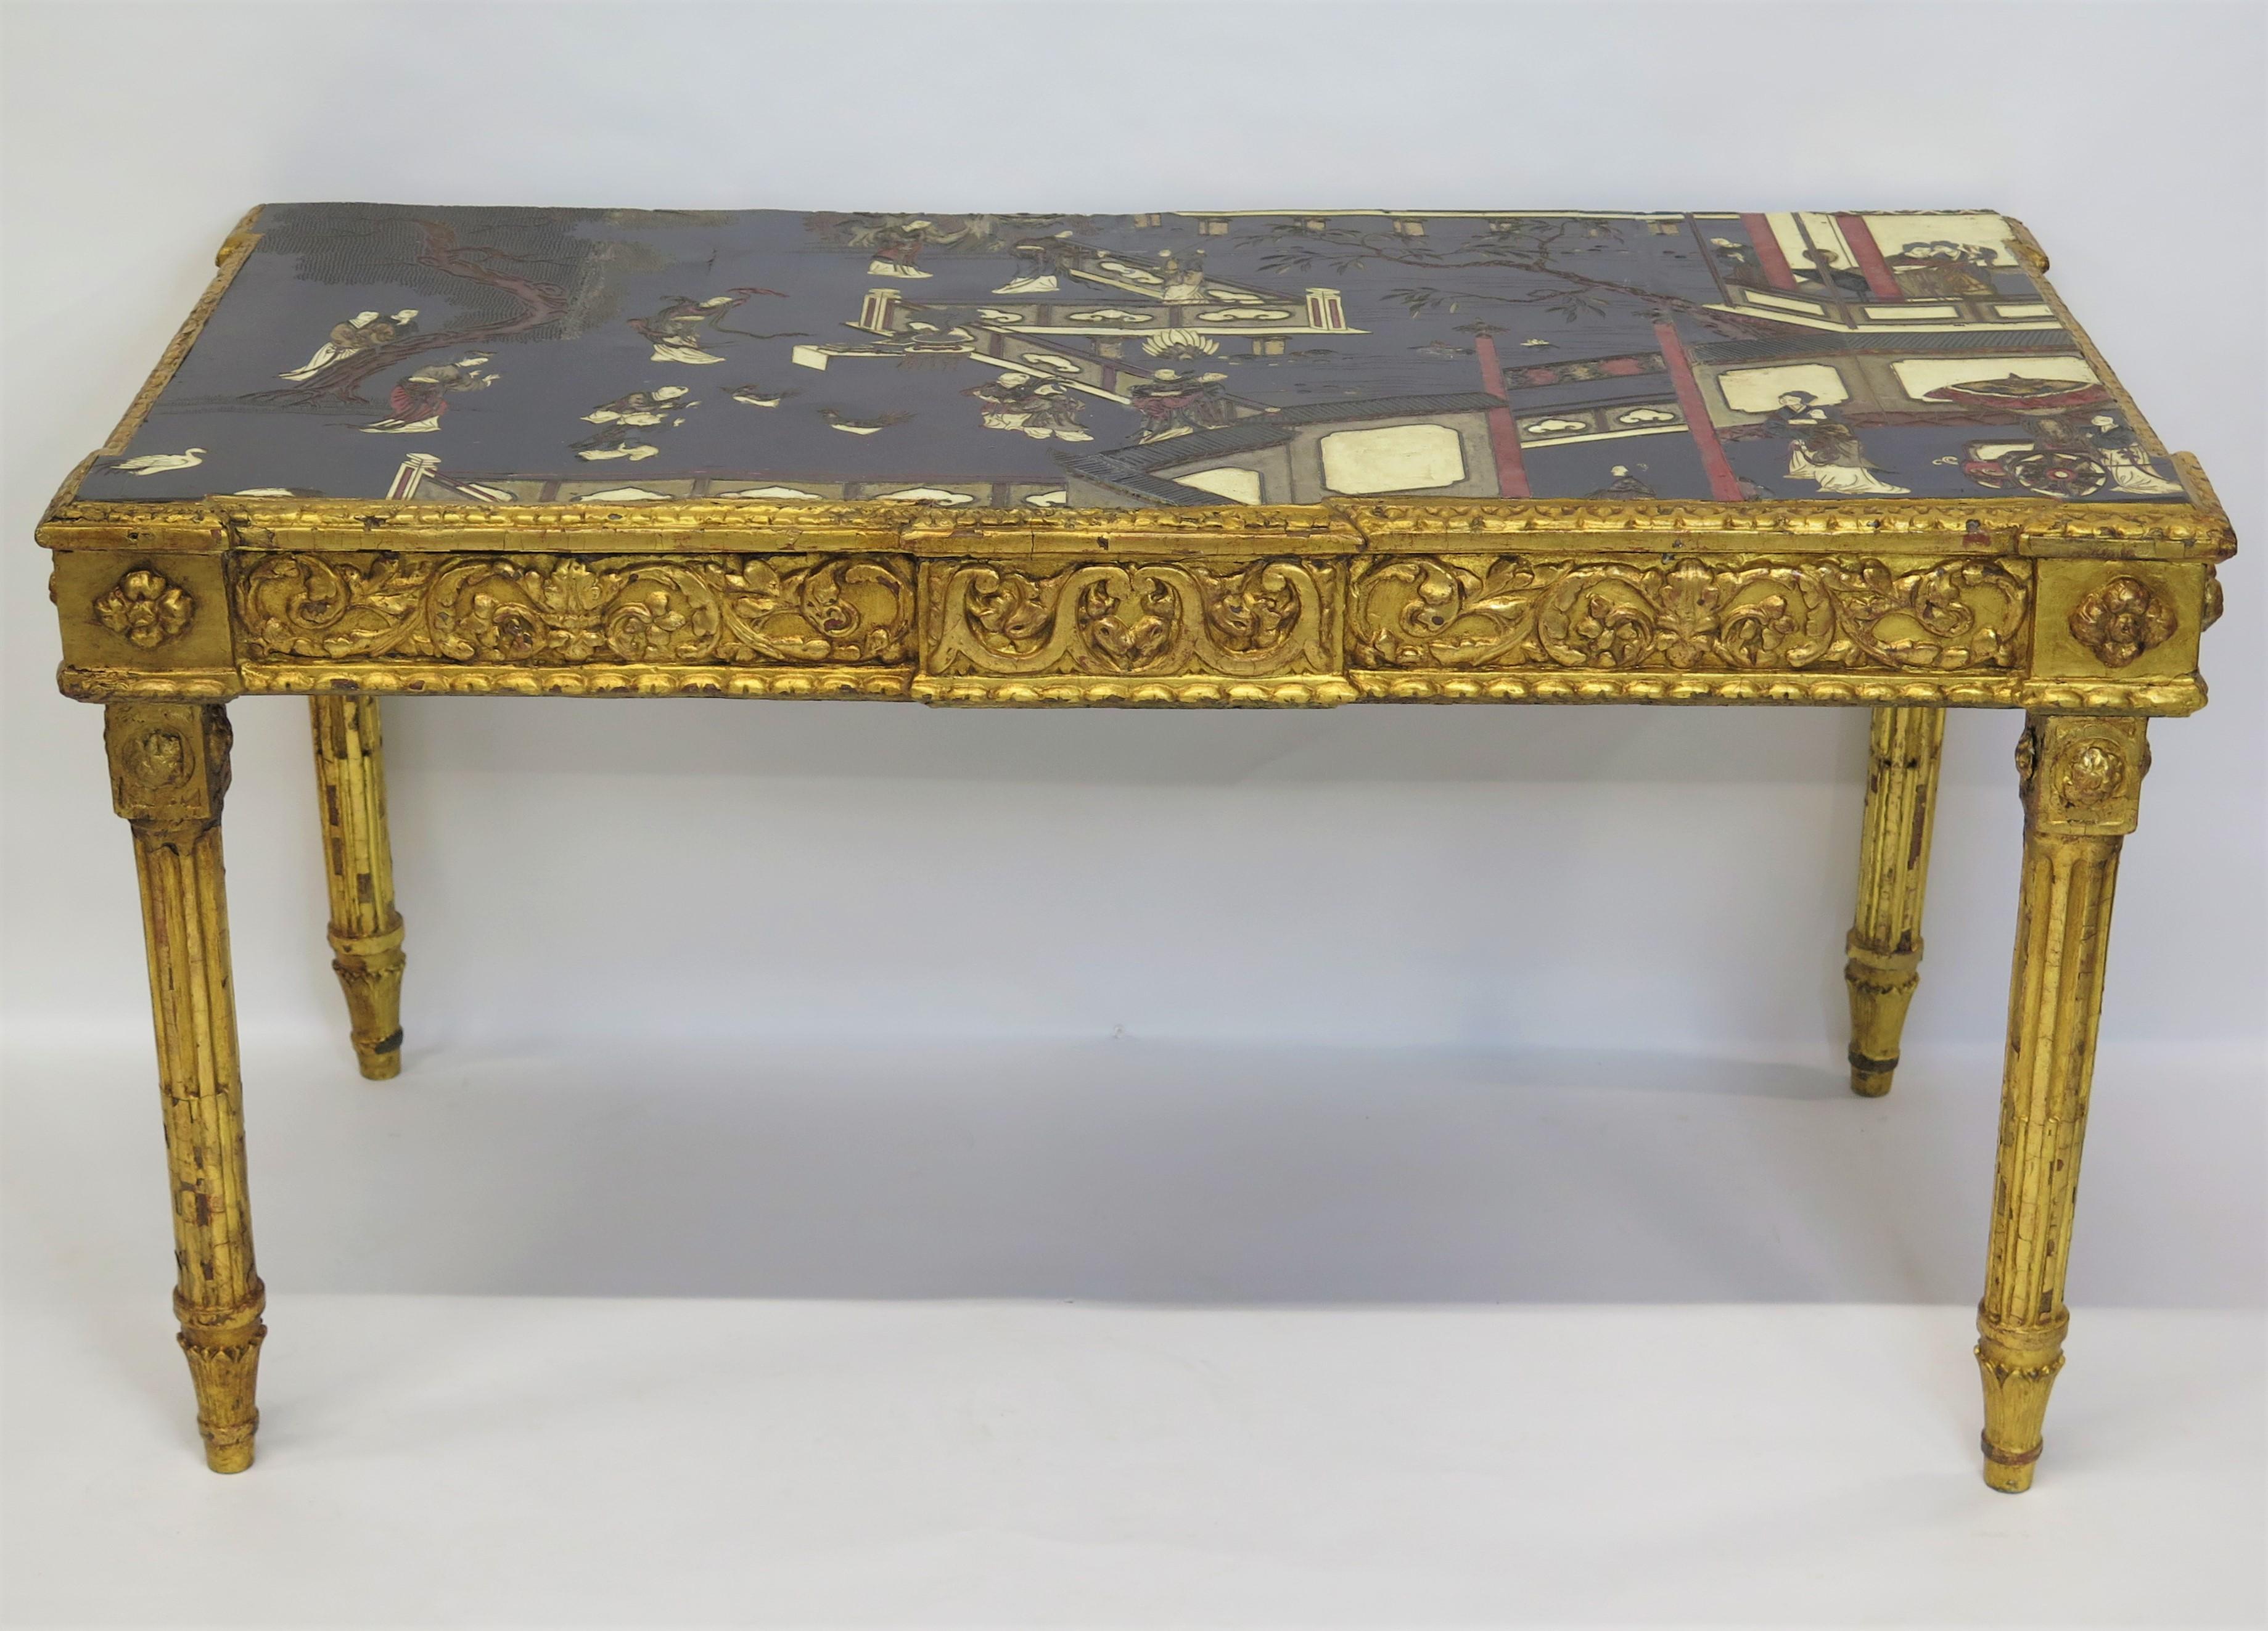 a very dramatic, mostly gold and black, Louis XVI console table with Chinese Coromandel top, the top is a section of a Coromandel screen) in black with red, green, and white / cream, carved giltwood frame, straight turned fluted legs, beautiful